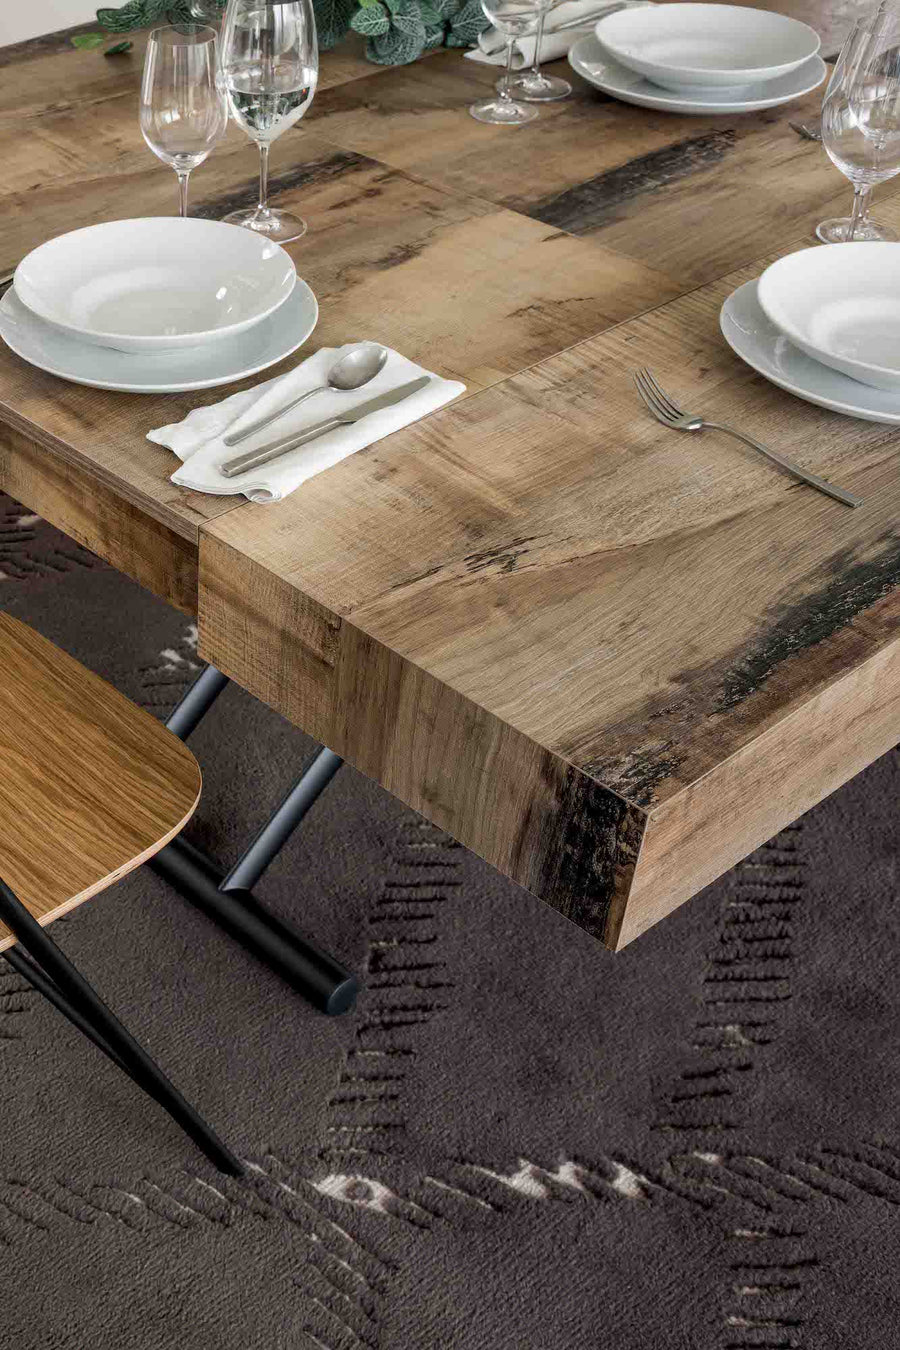 Piazza Rise - Multifunction Coffee Table Transform to Dining Table - Space Saving Tables - Spaceman Singapore